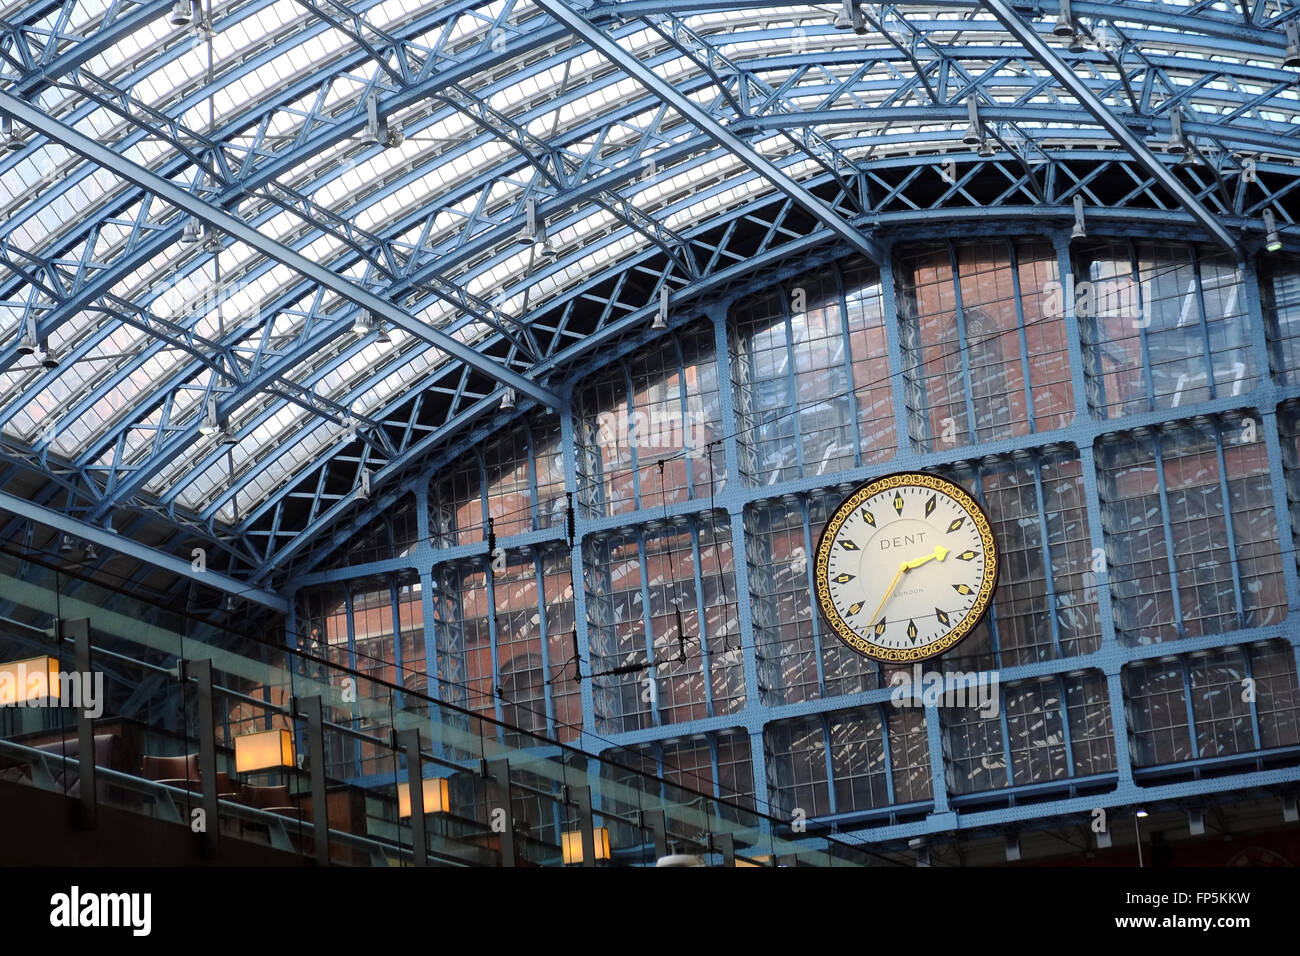 The clock above the concourse at St. Pancras International Railway Station, in London, England, UK, Europe. Stock Photo